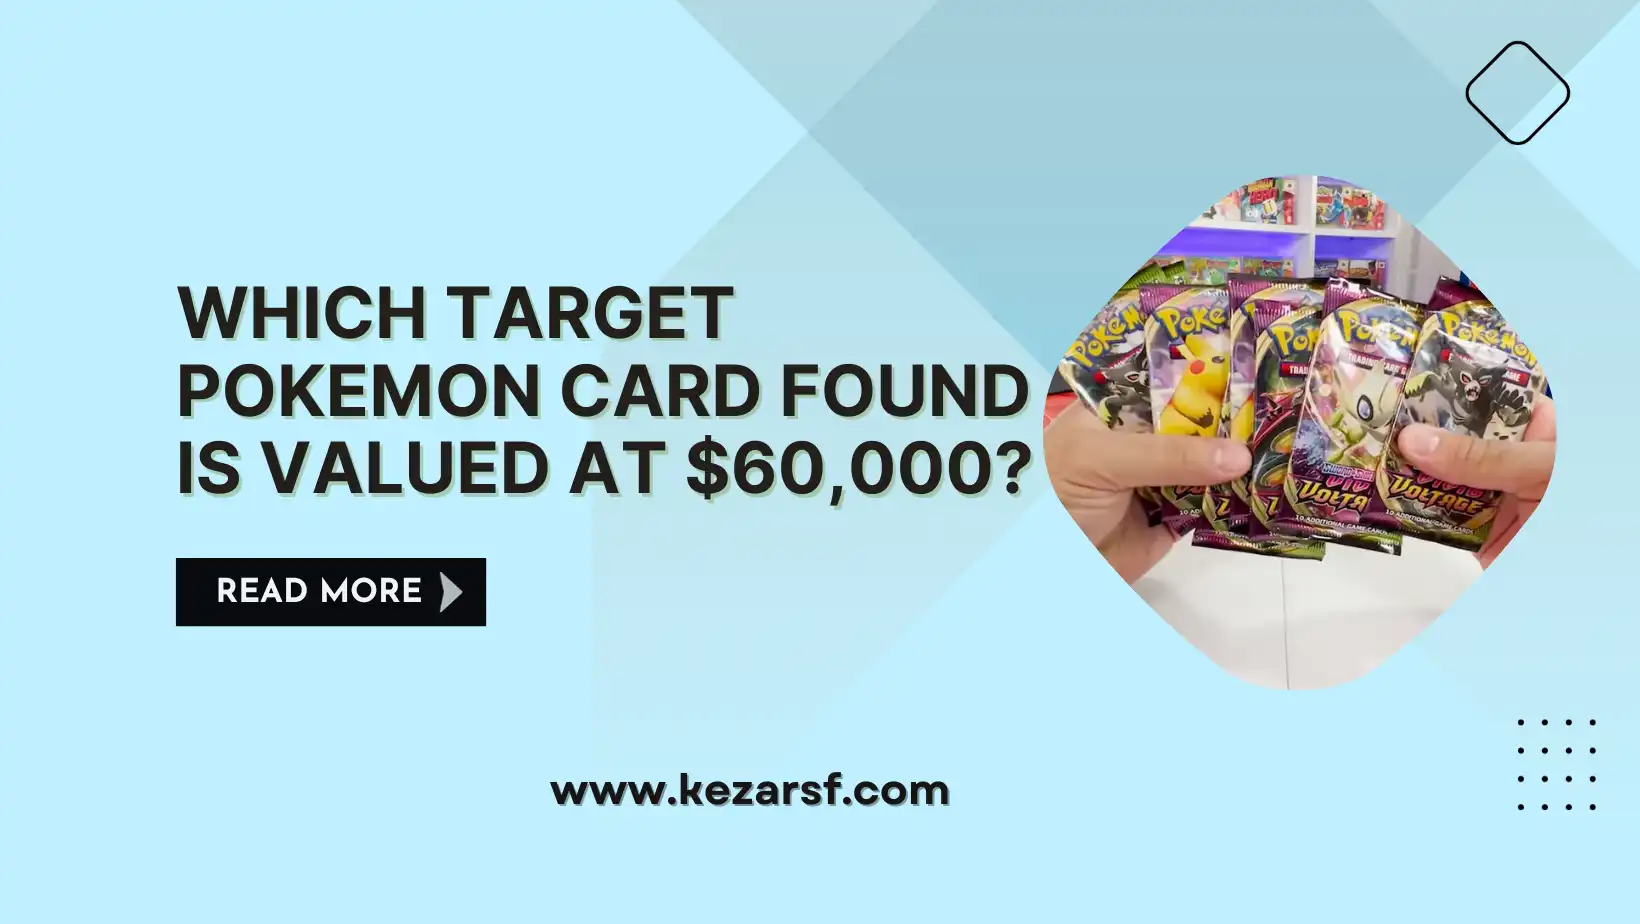 Which Target Pokemon Card Found is Valued at $60,000?